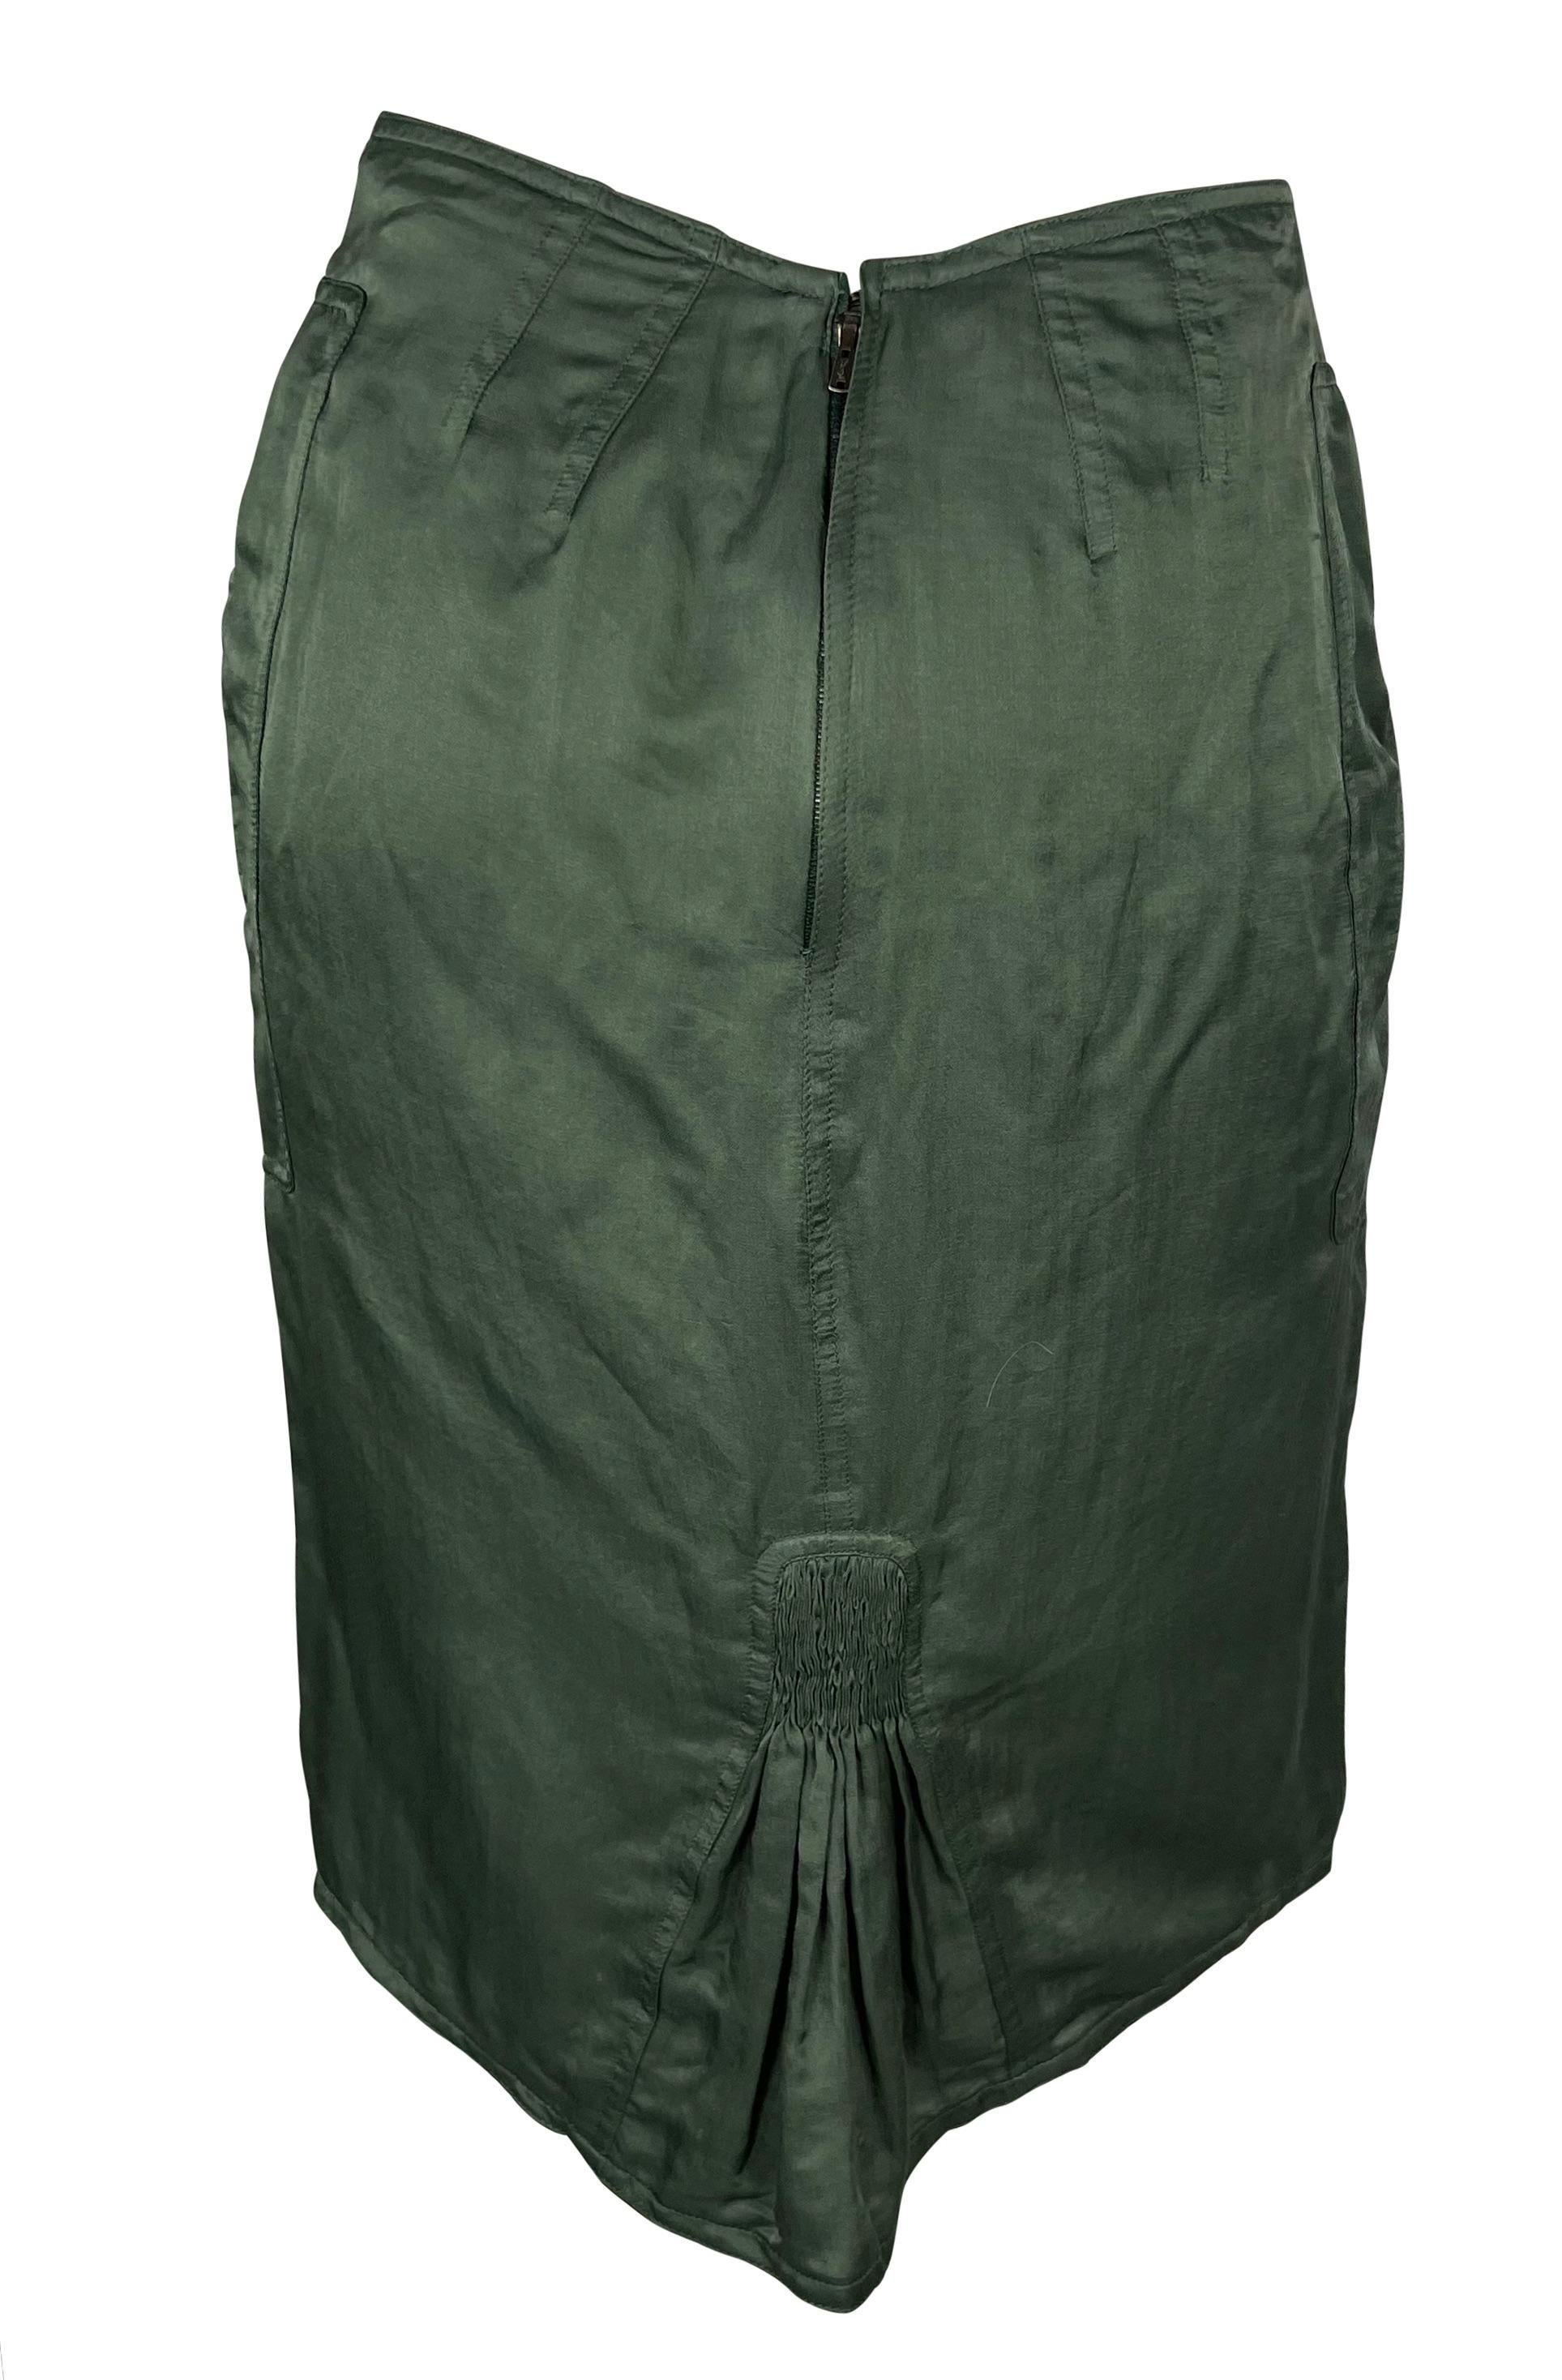 S/S 2003 Yves Saint Laurent by Tom Ford Olive Green Ruched Stretch Skirt In Good Condition For Sale In West Hollywood, CA